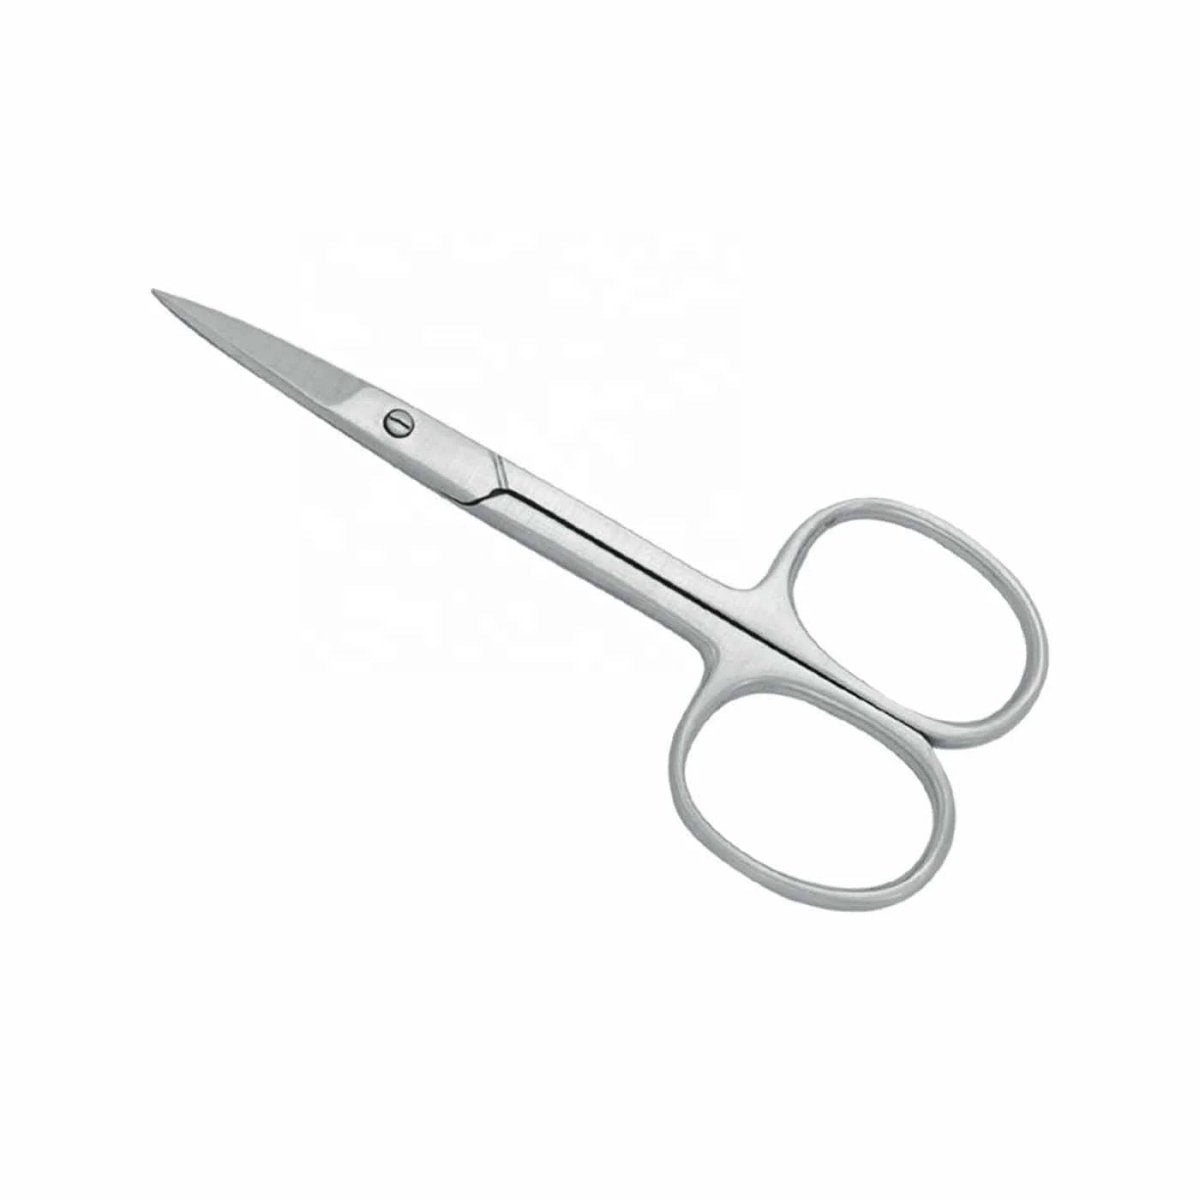 Eyebrow Trimmers / Brow Scissors, Stainless Steel